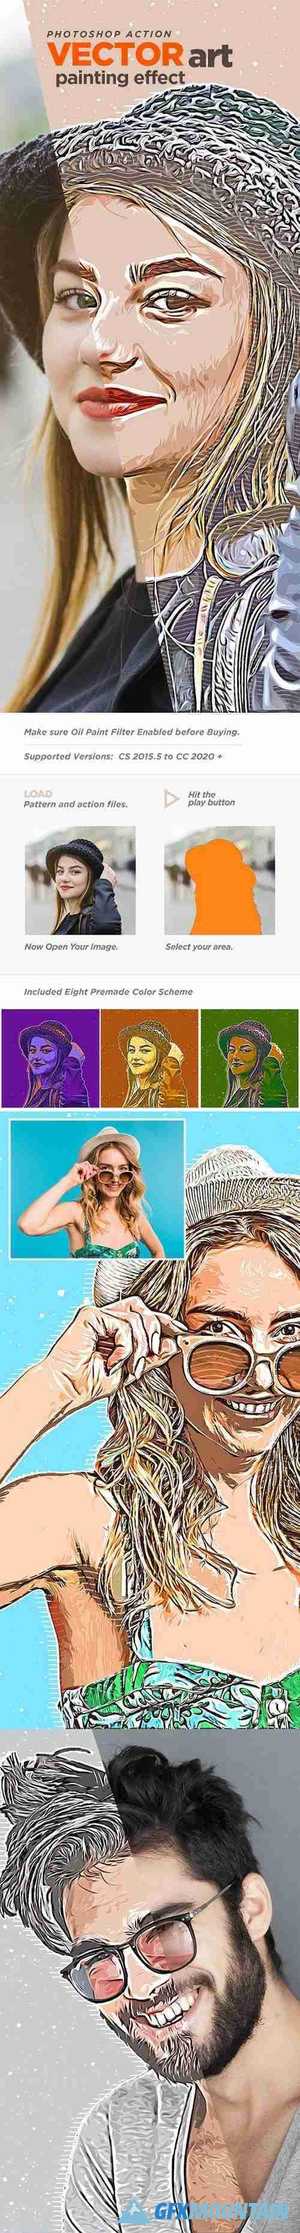 Vector Art Painting Effect Photoshop Action 27010115